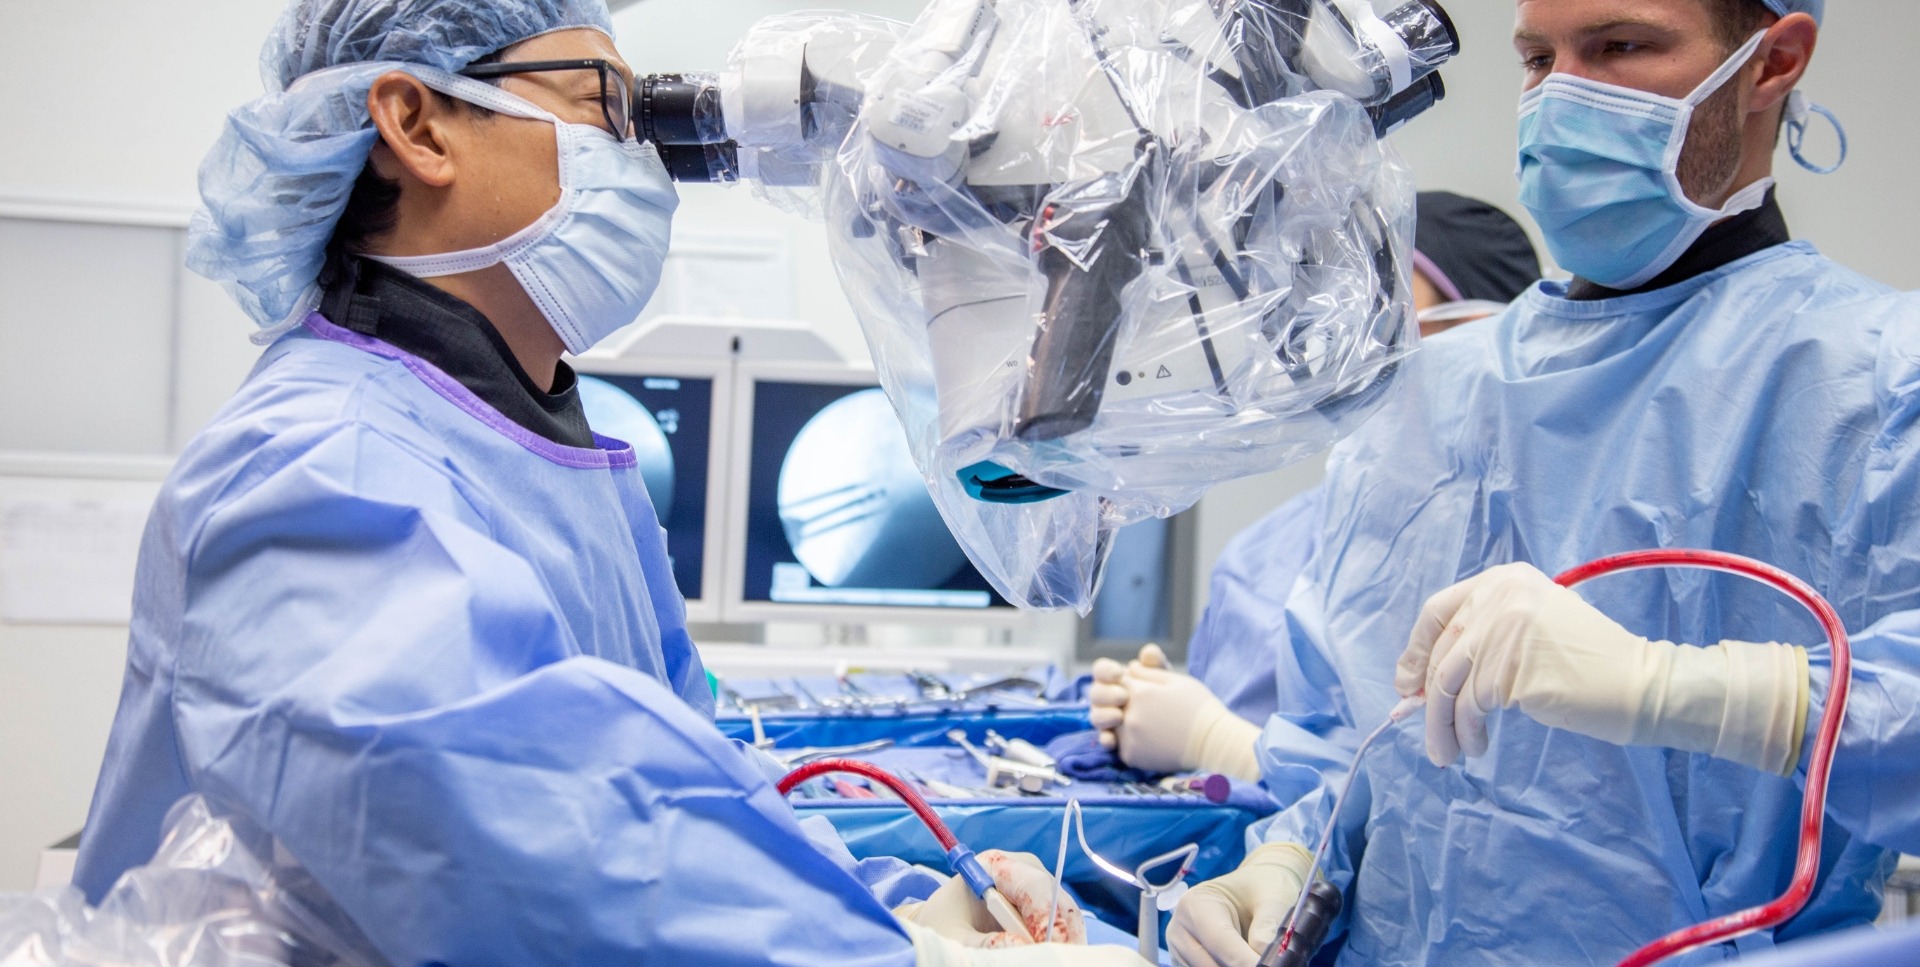 Dr. Young performing minimally invasive spine surgery